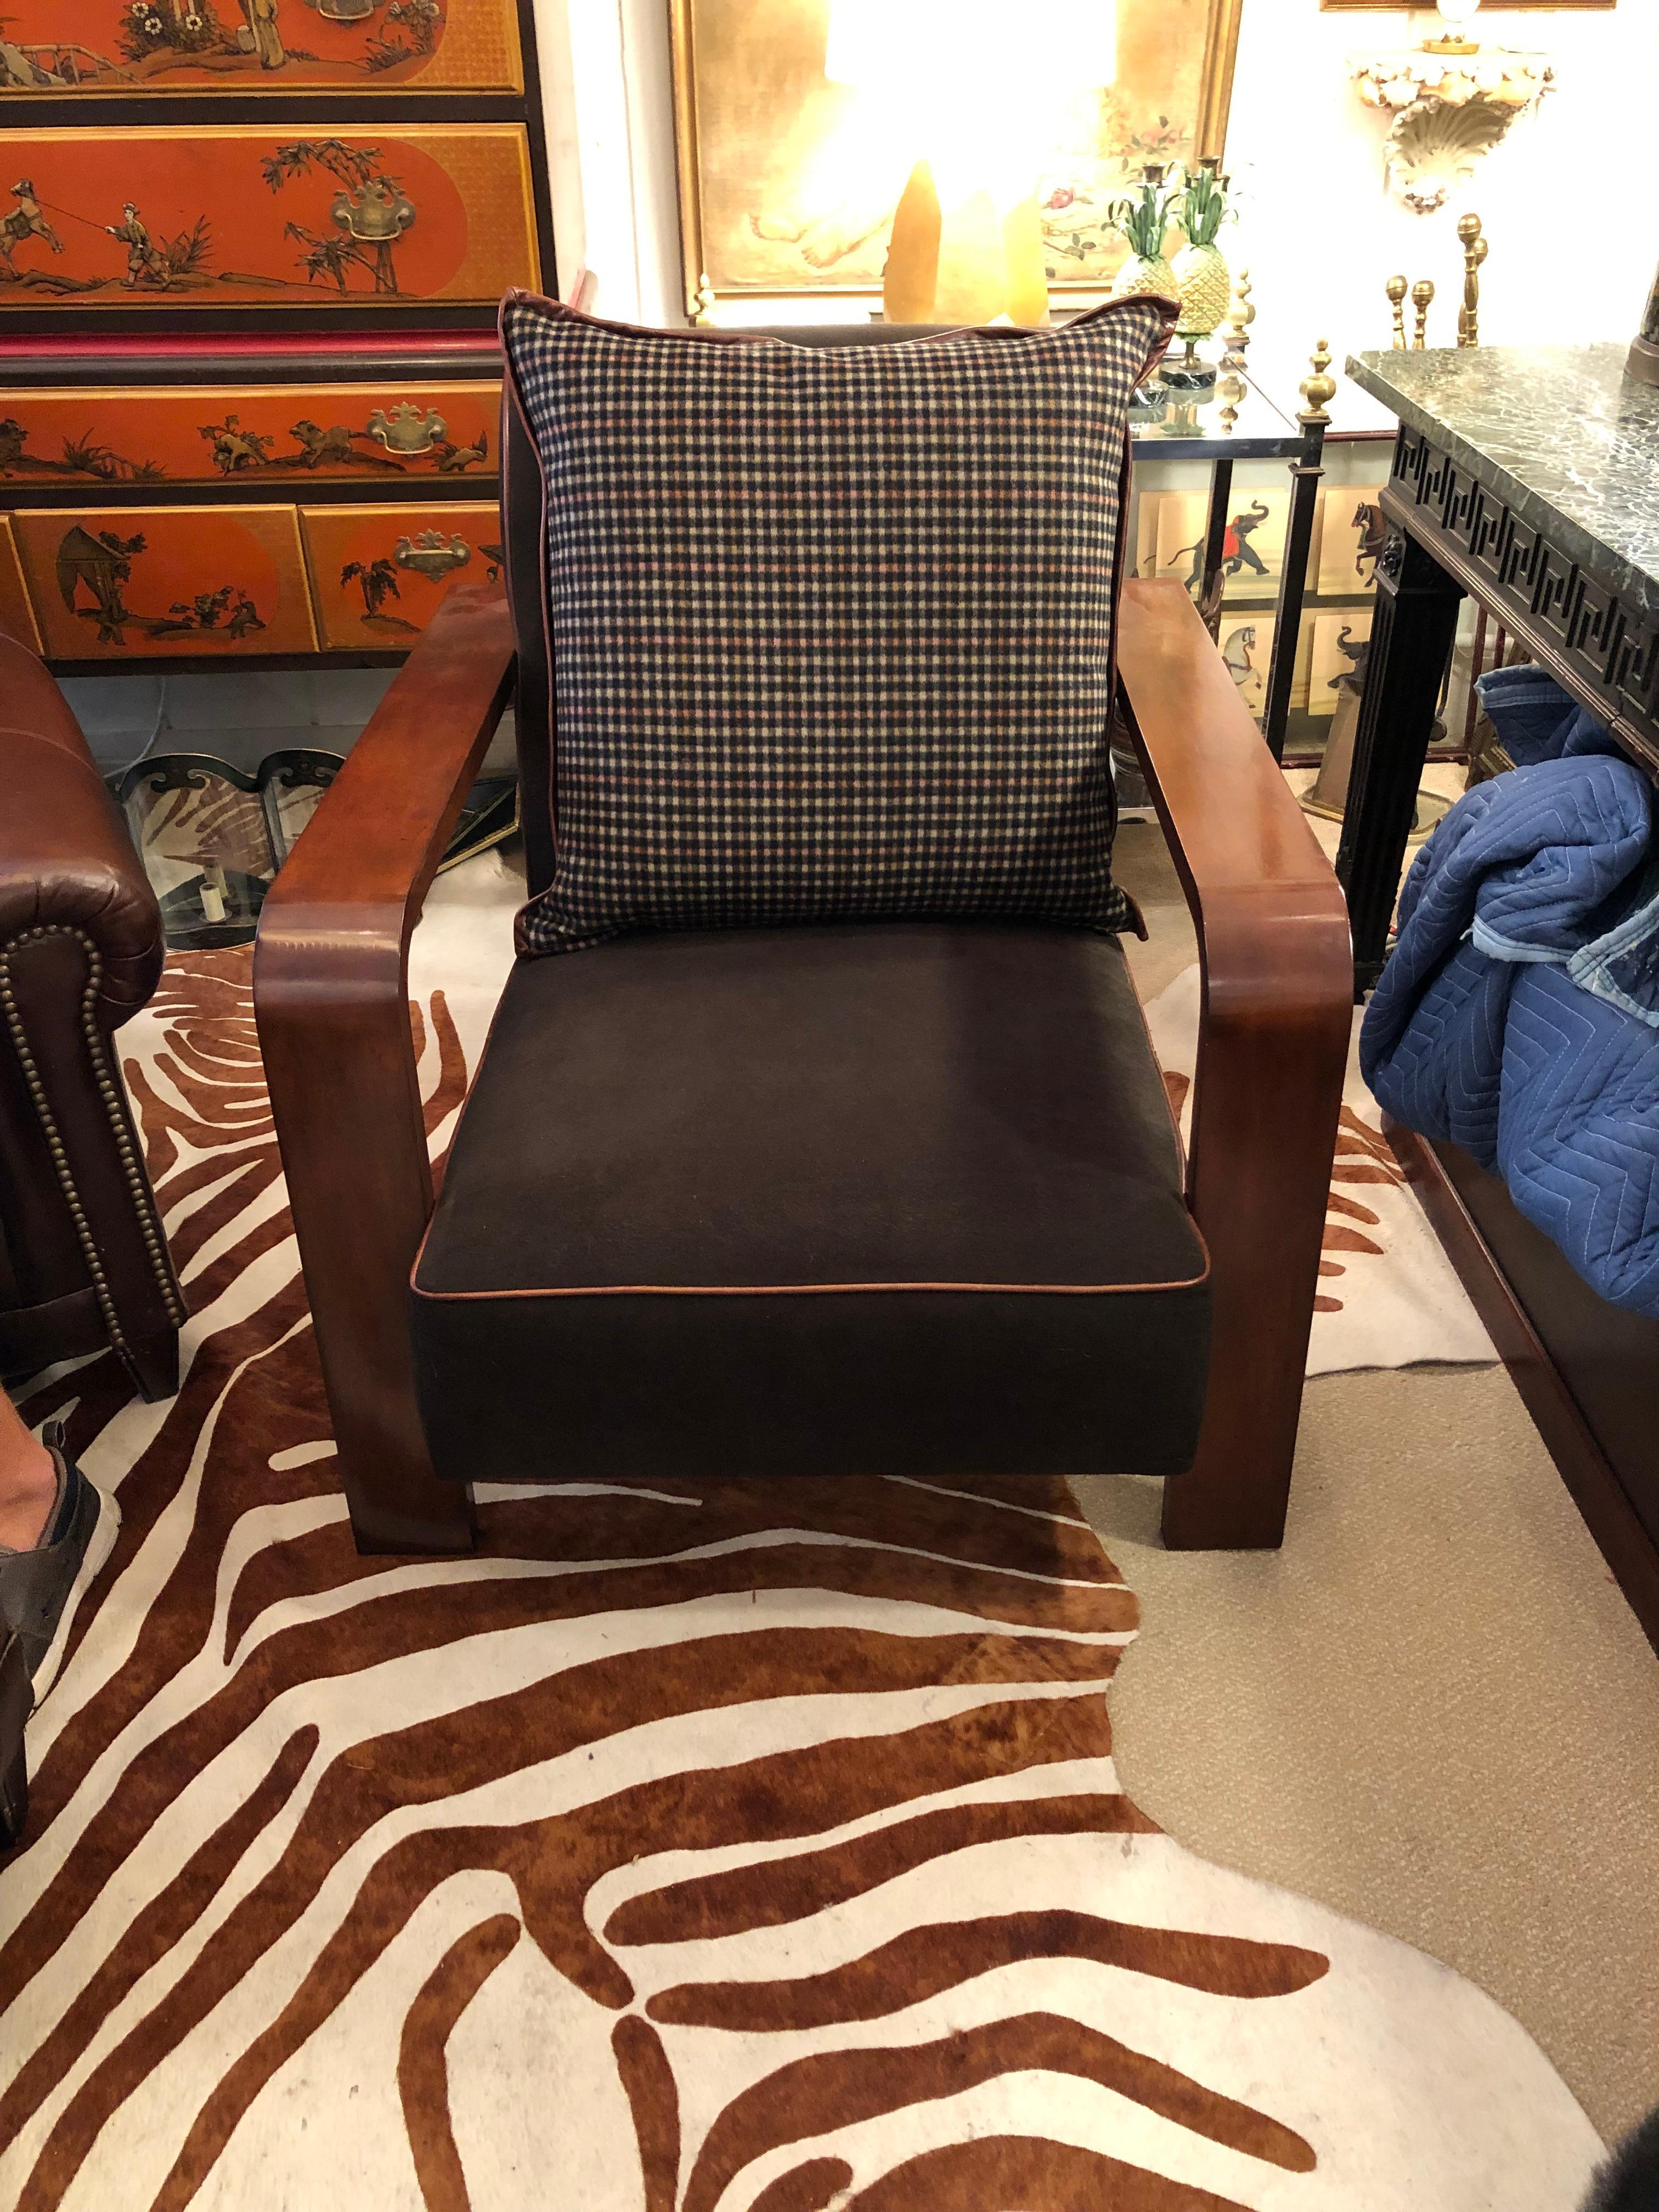 Elegant art deco inspired club chair by Ralph Lauren having beautiful glossy mahogany curvy arms, straight legs and extension back. The permanent seat and back cushions are sumptuous dark charcoal mohair with brown piping, and the generous plaid